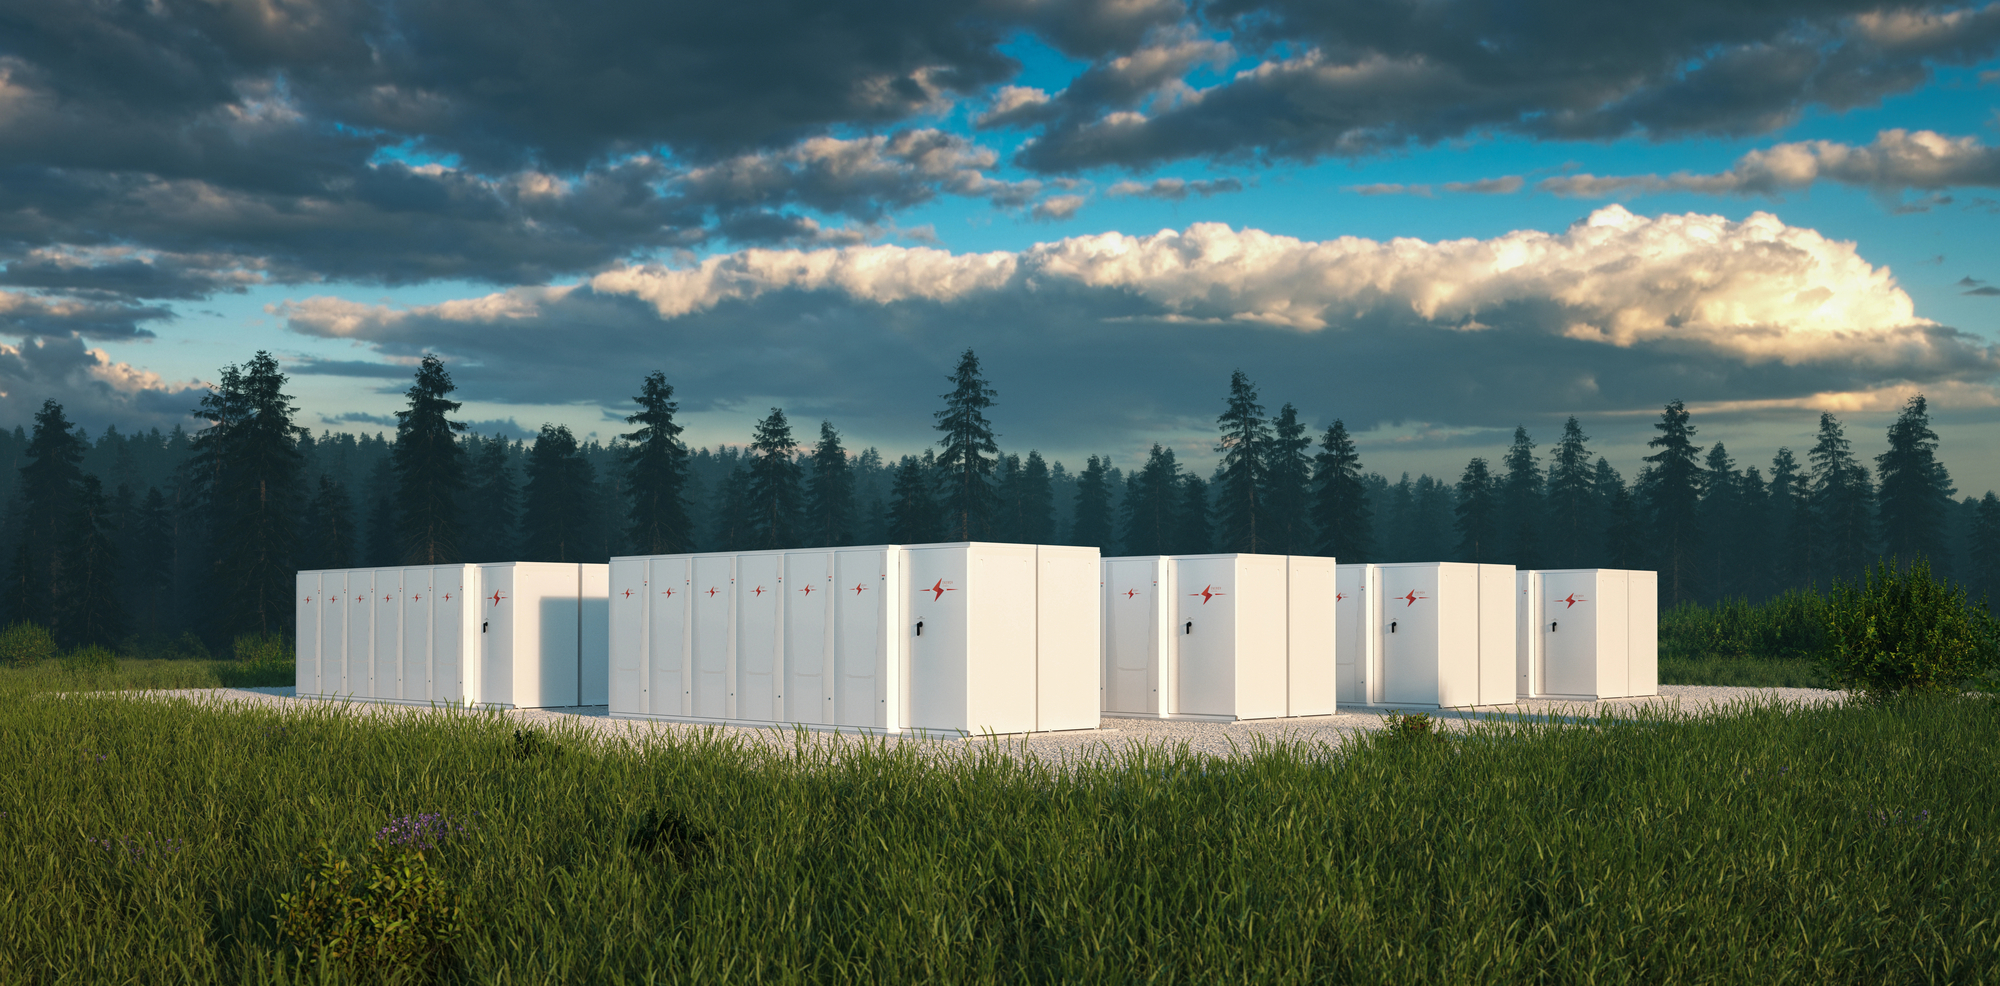 The Different Technologies of an Energy Storage Network